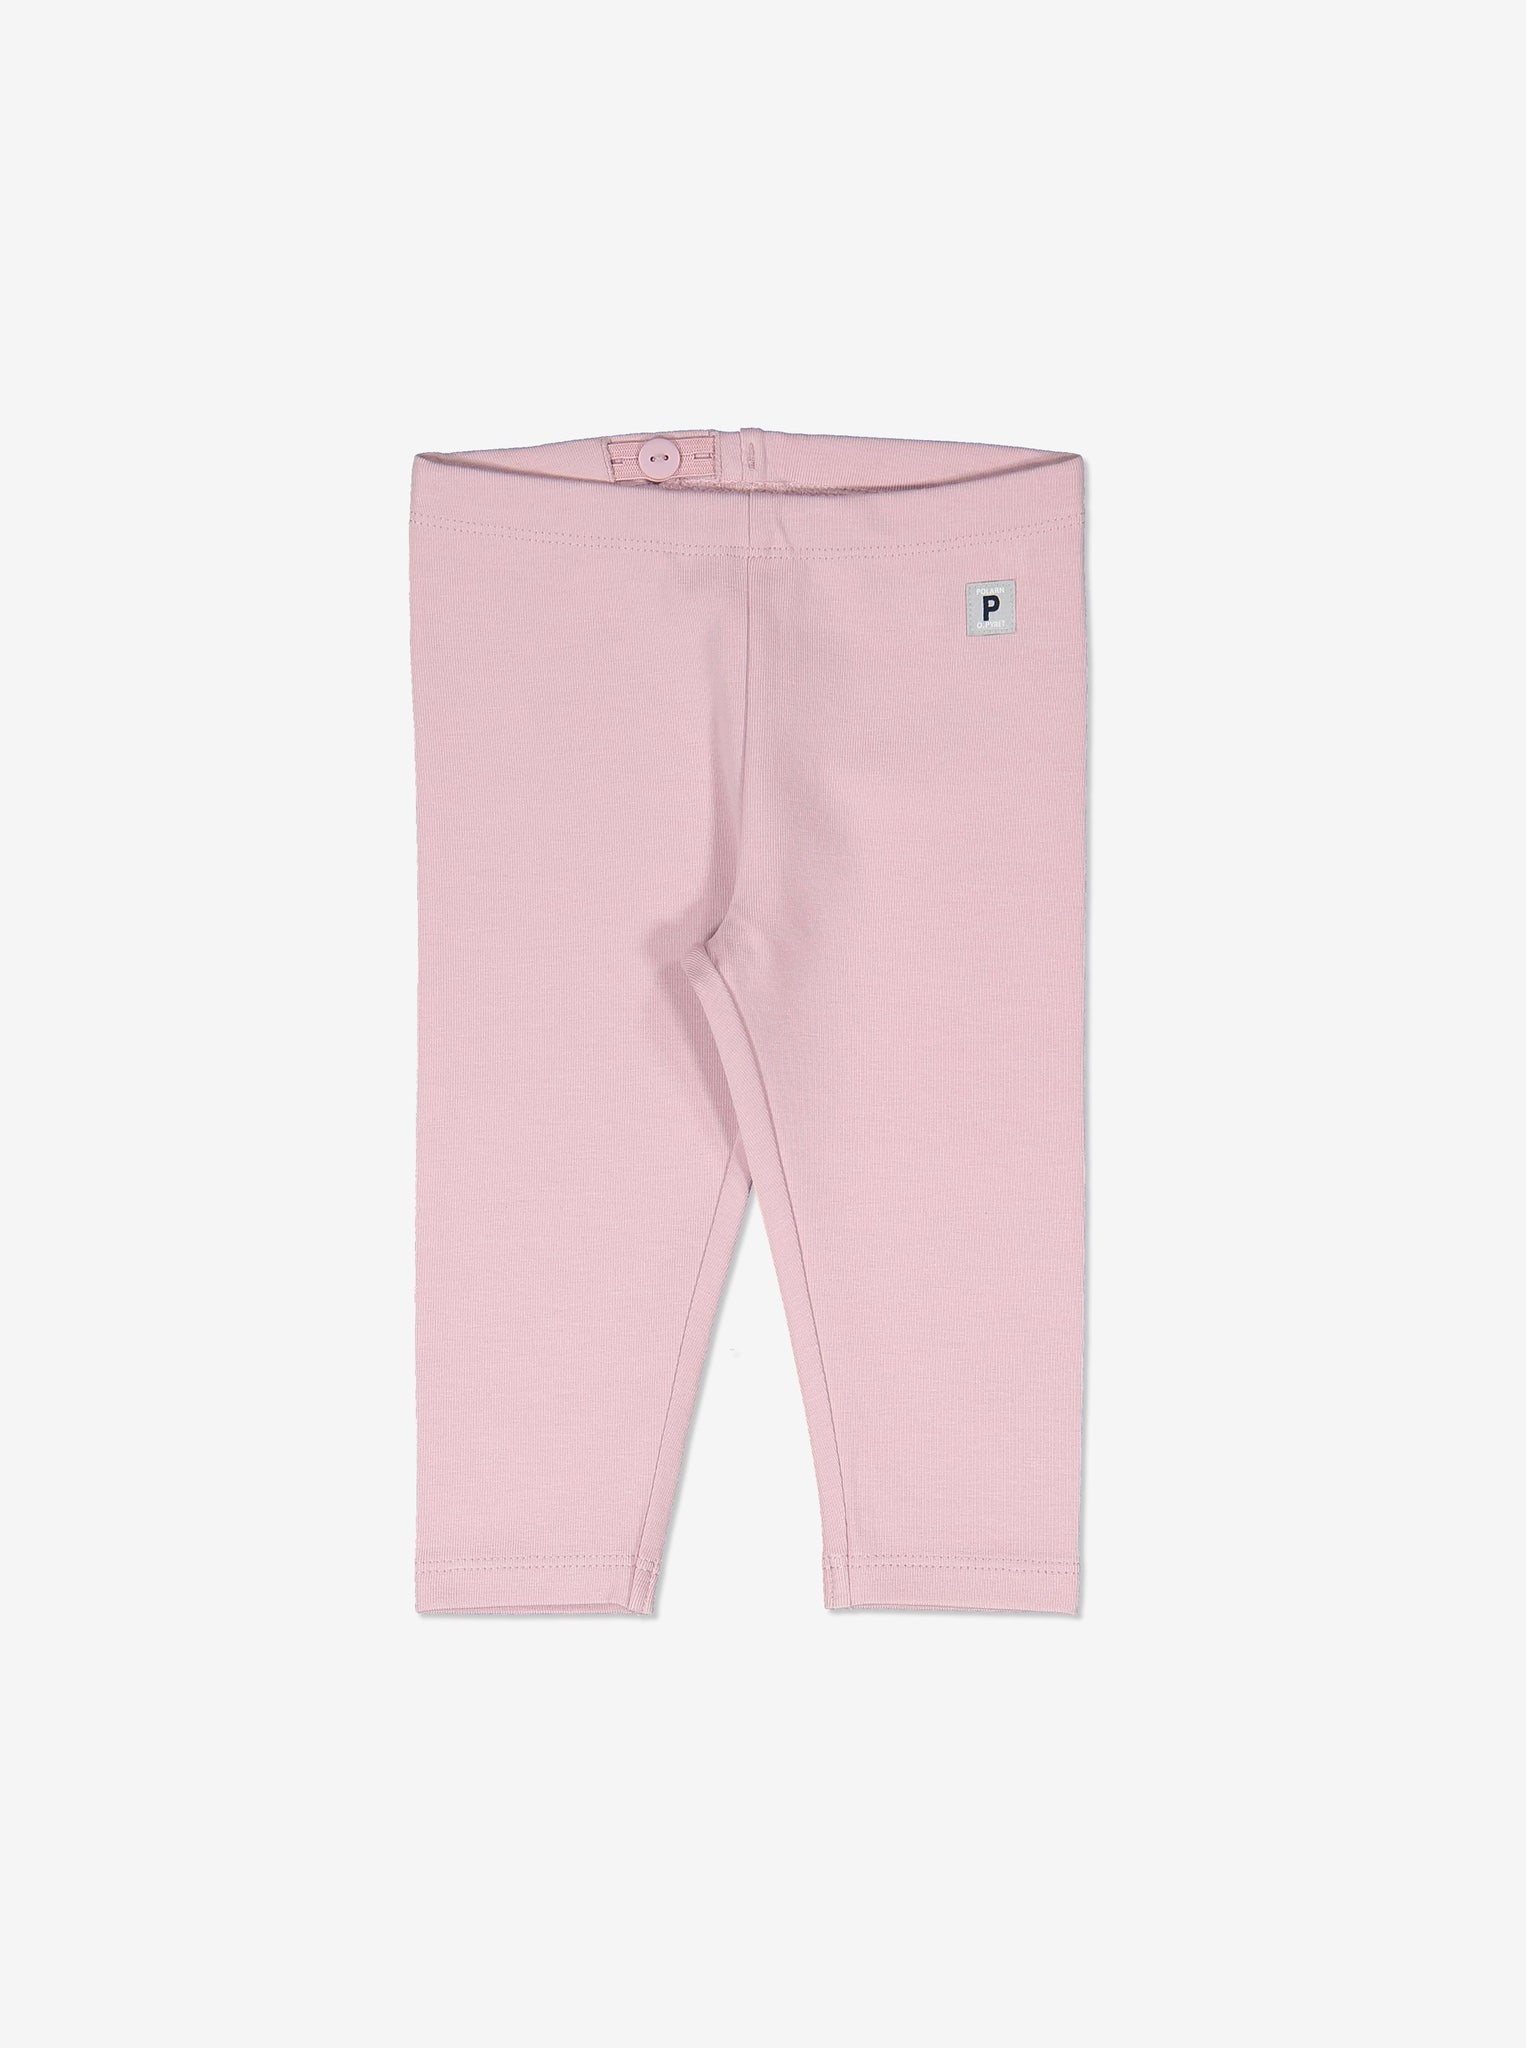 Adjustable Girls pink leggings made with soft and warm organic cotton, perfect for wearing during the winter season.